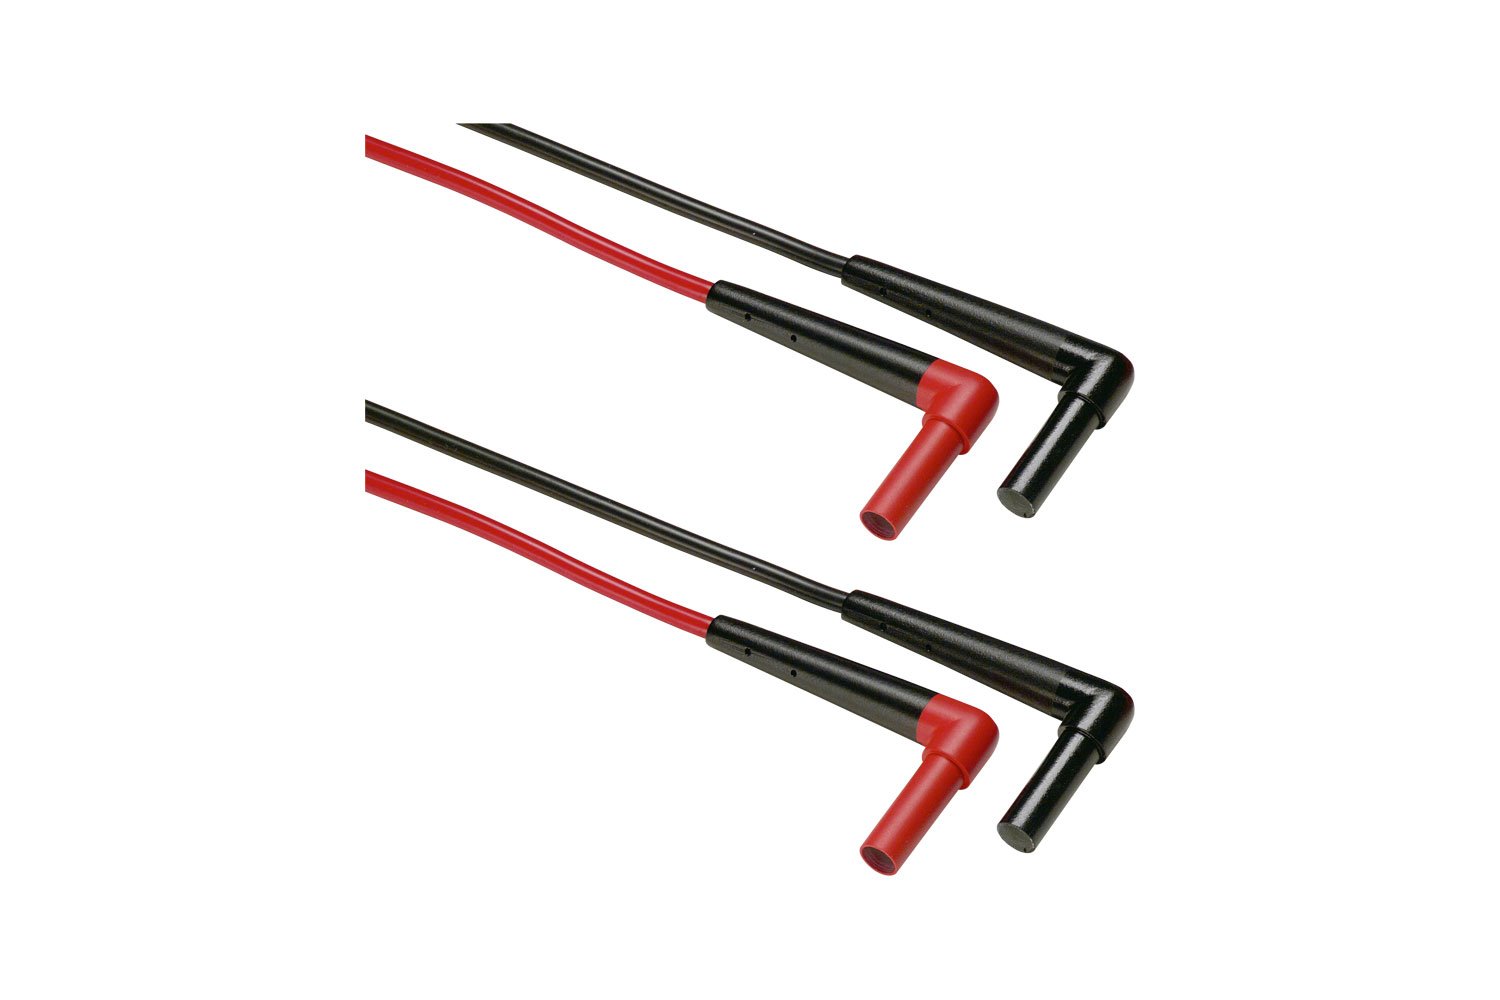 TP220 Alligator Clips SureGrip Test Probes Replace TL 223 FLUKE Silicone TL222 